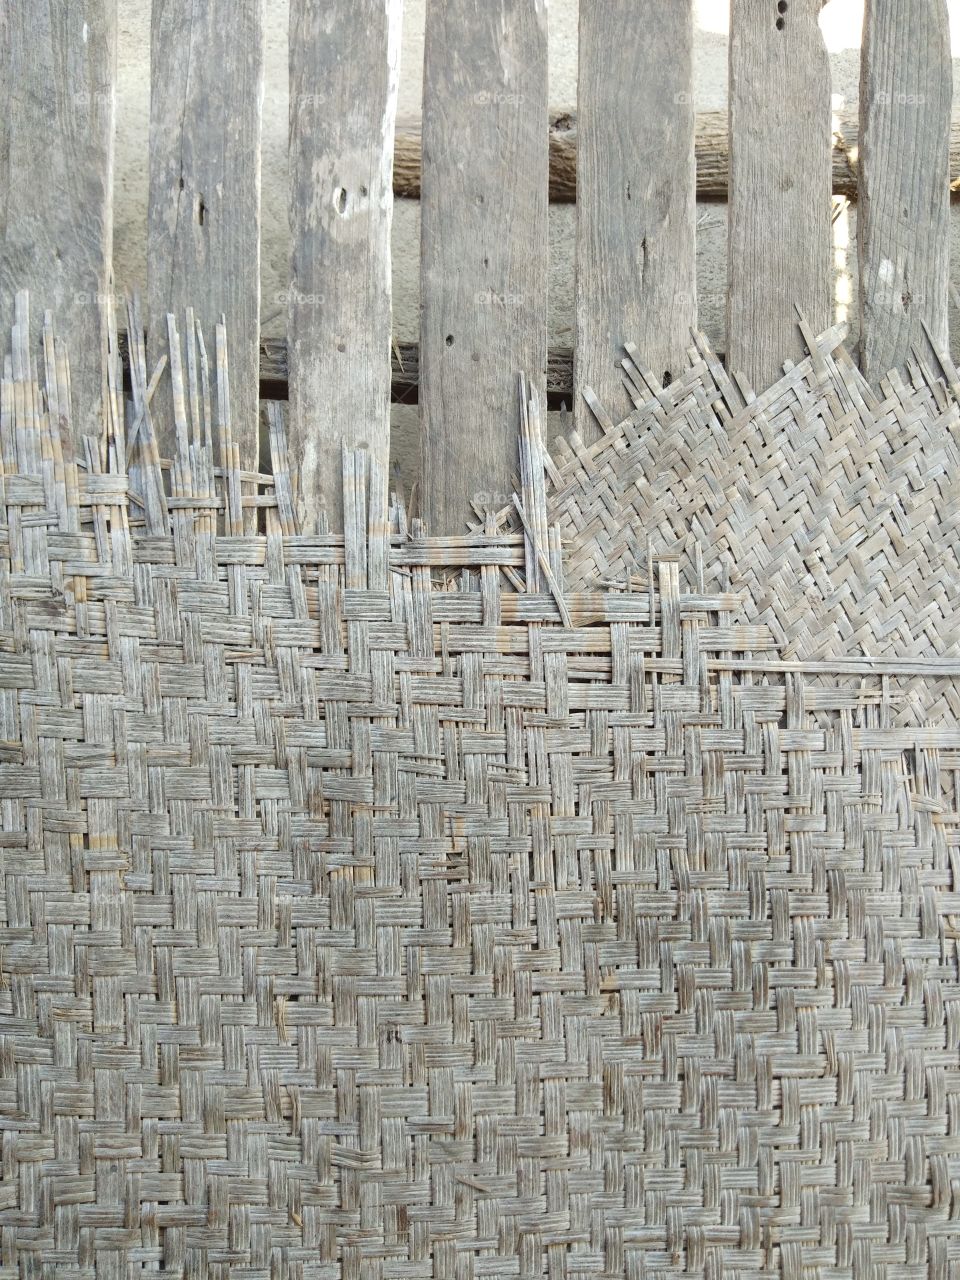 The weaved bamboo mats that are old and torn from use by laying the top of the litter for a long time.